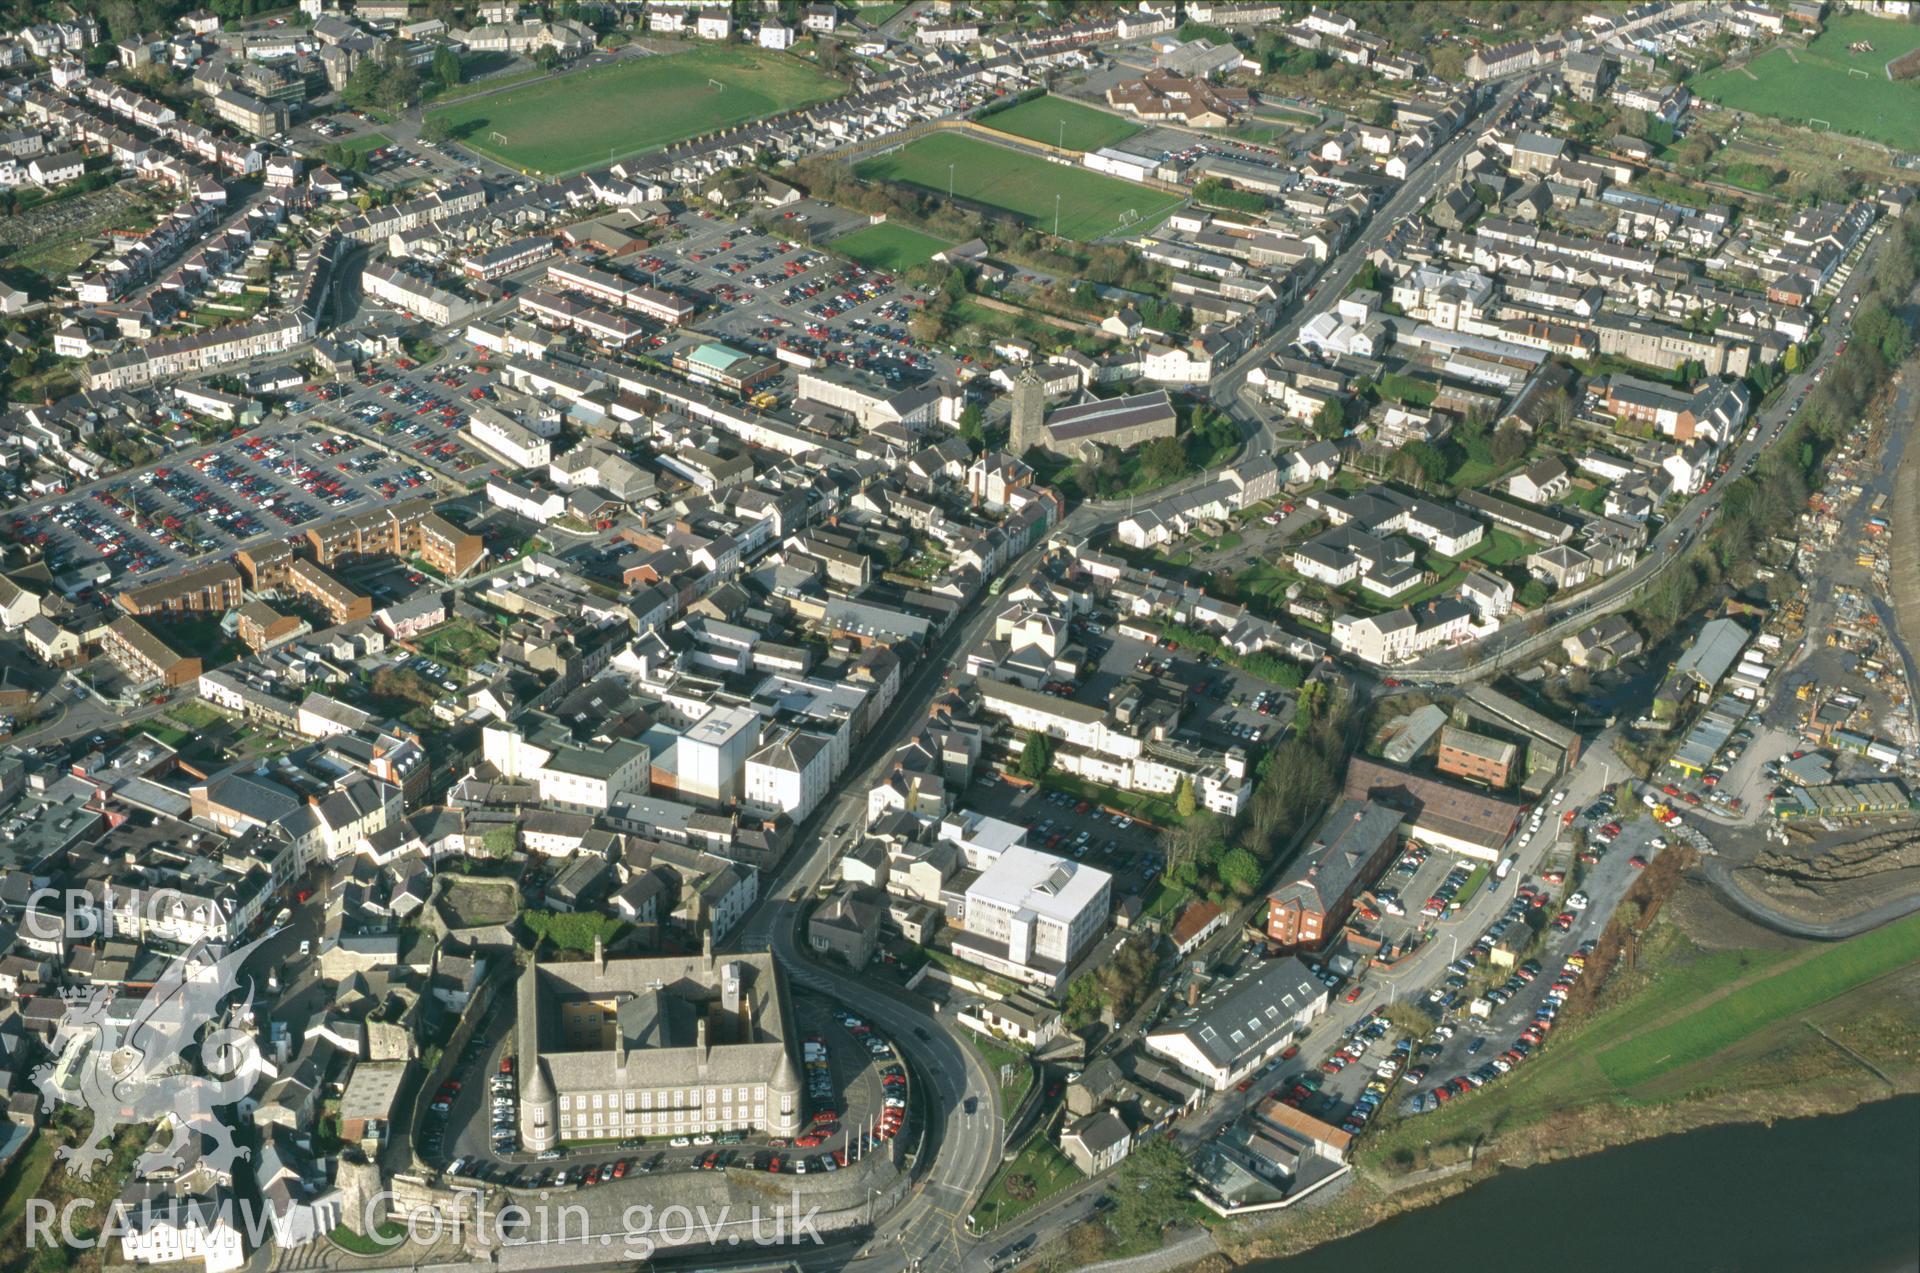 RCAHMW colour slide oblique aerial photograph of Carmarthen, taken by T.G.Driver on the 21/02/2000